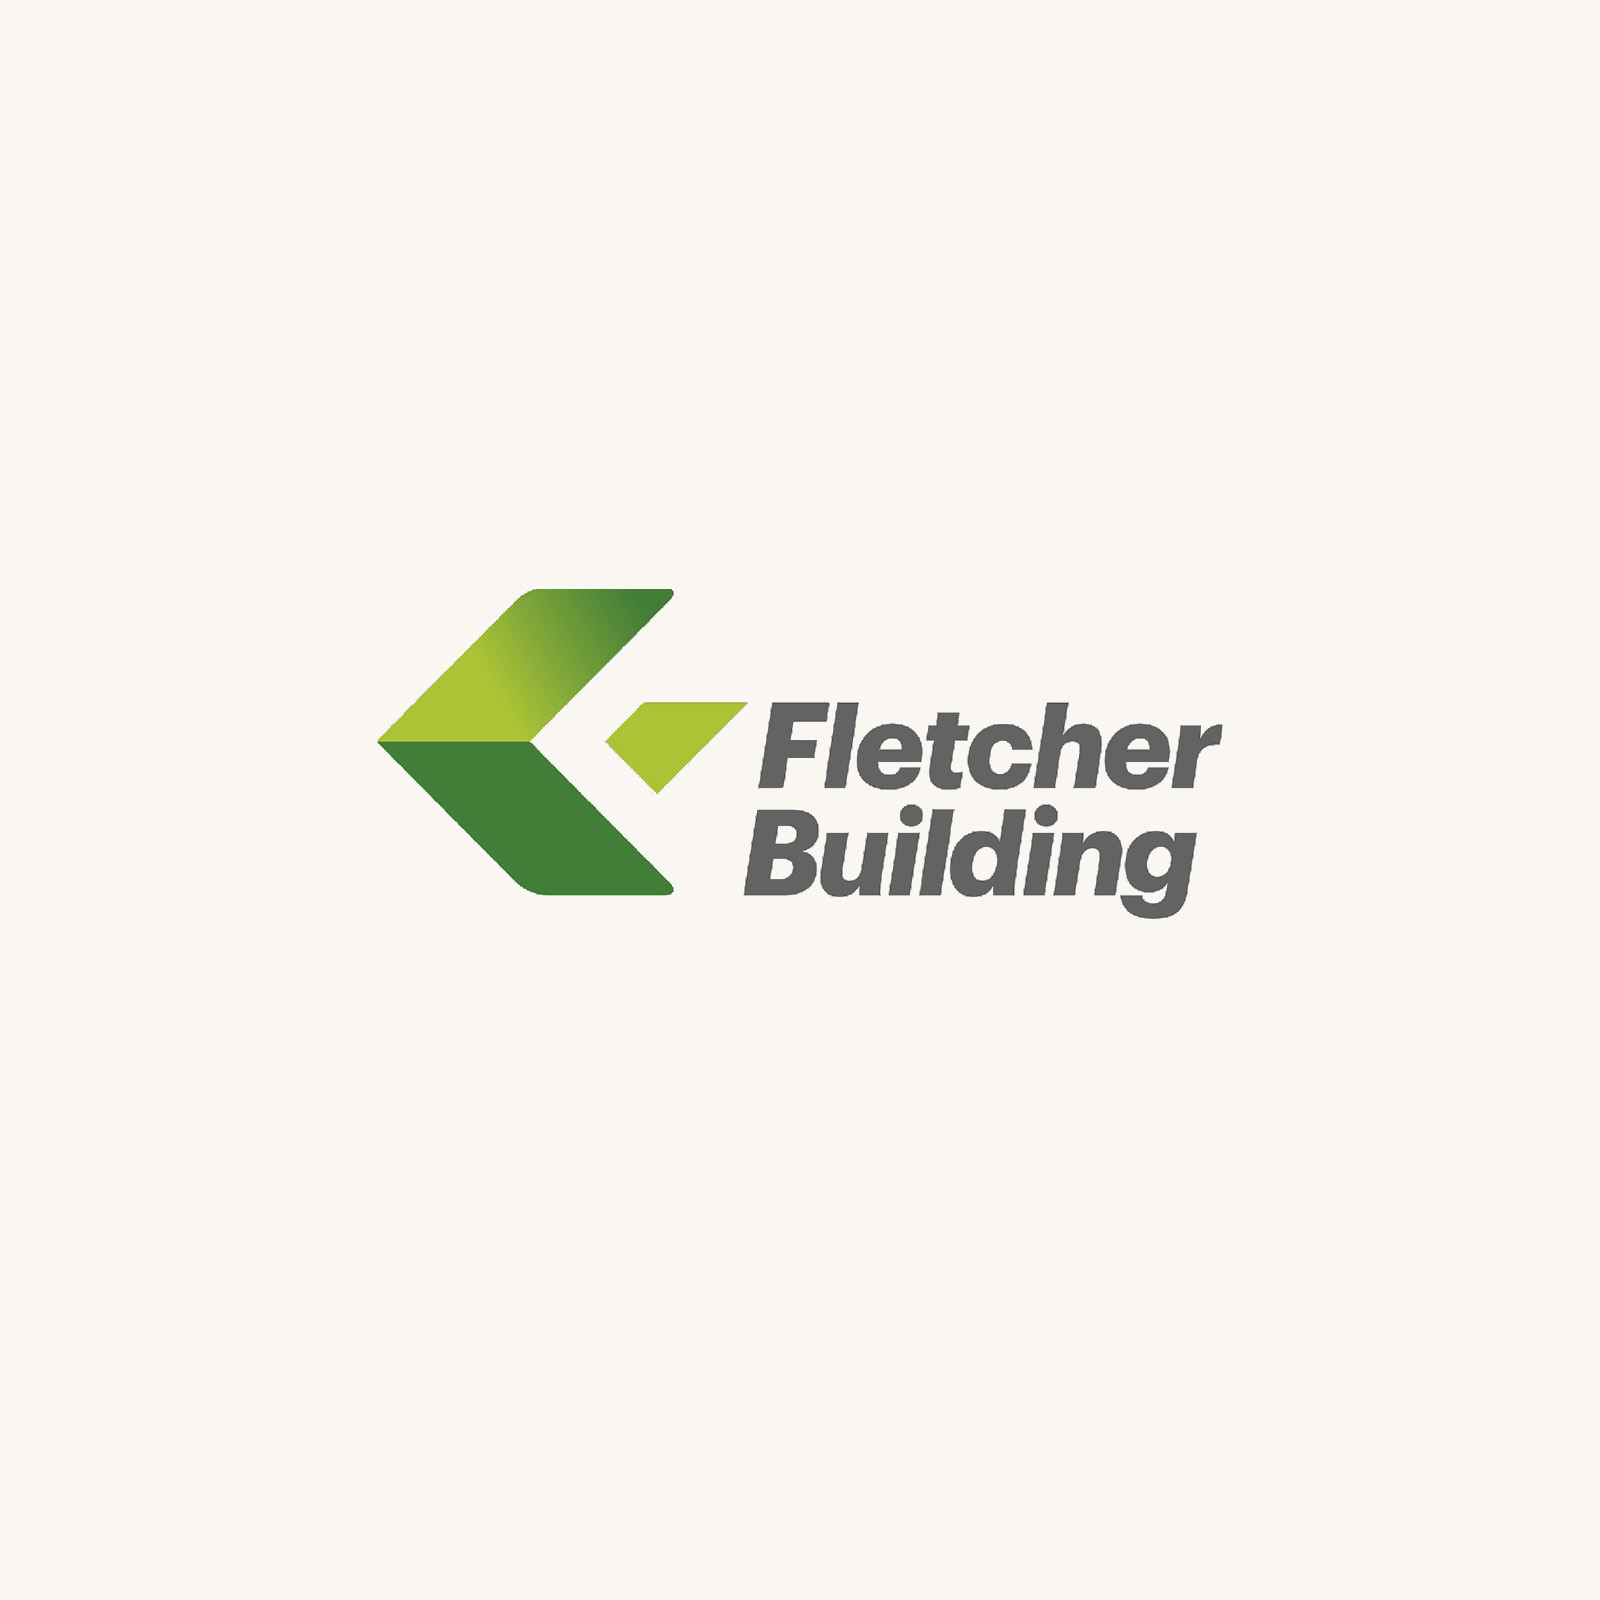 Owen Wang recently appointed as Senior Financial Analyst at Fletcher Building